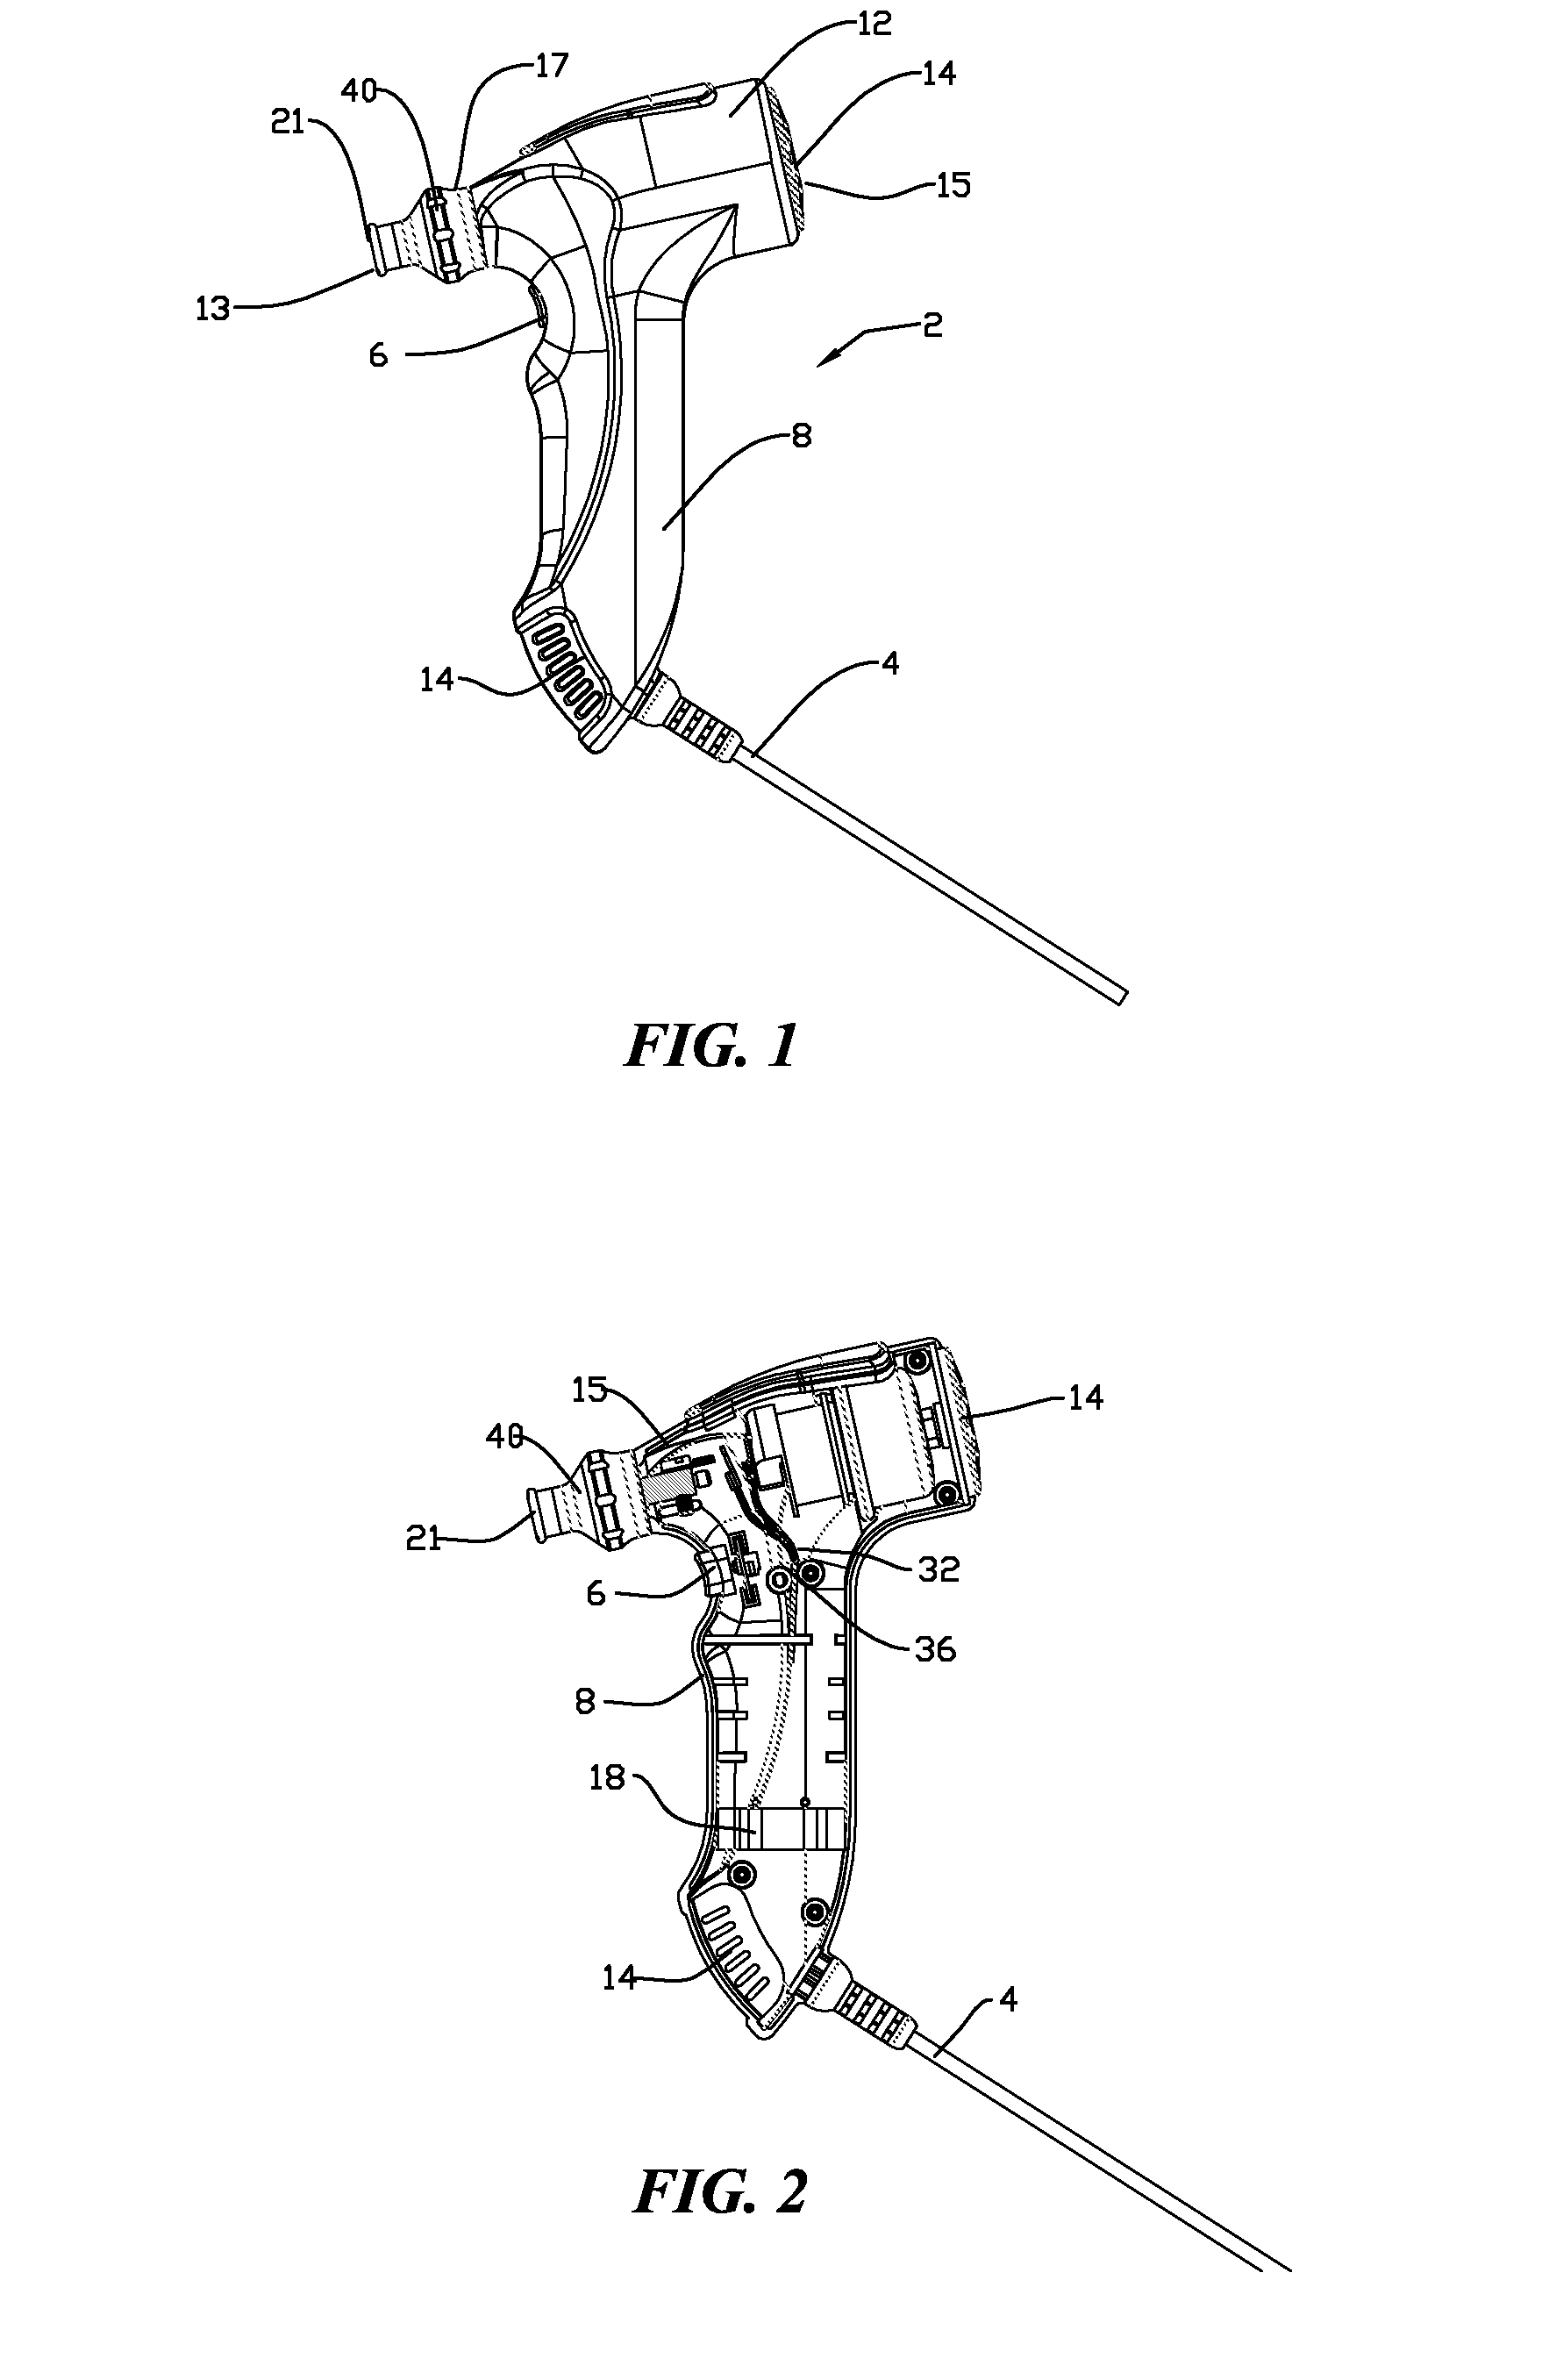 Probe for obtaining bioelectrical signals